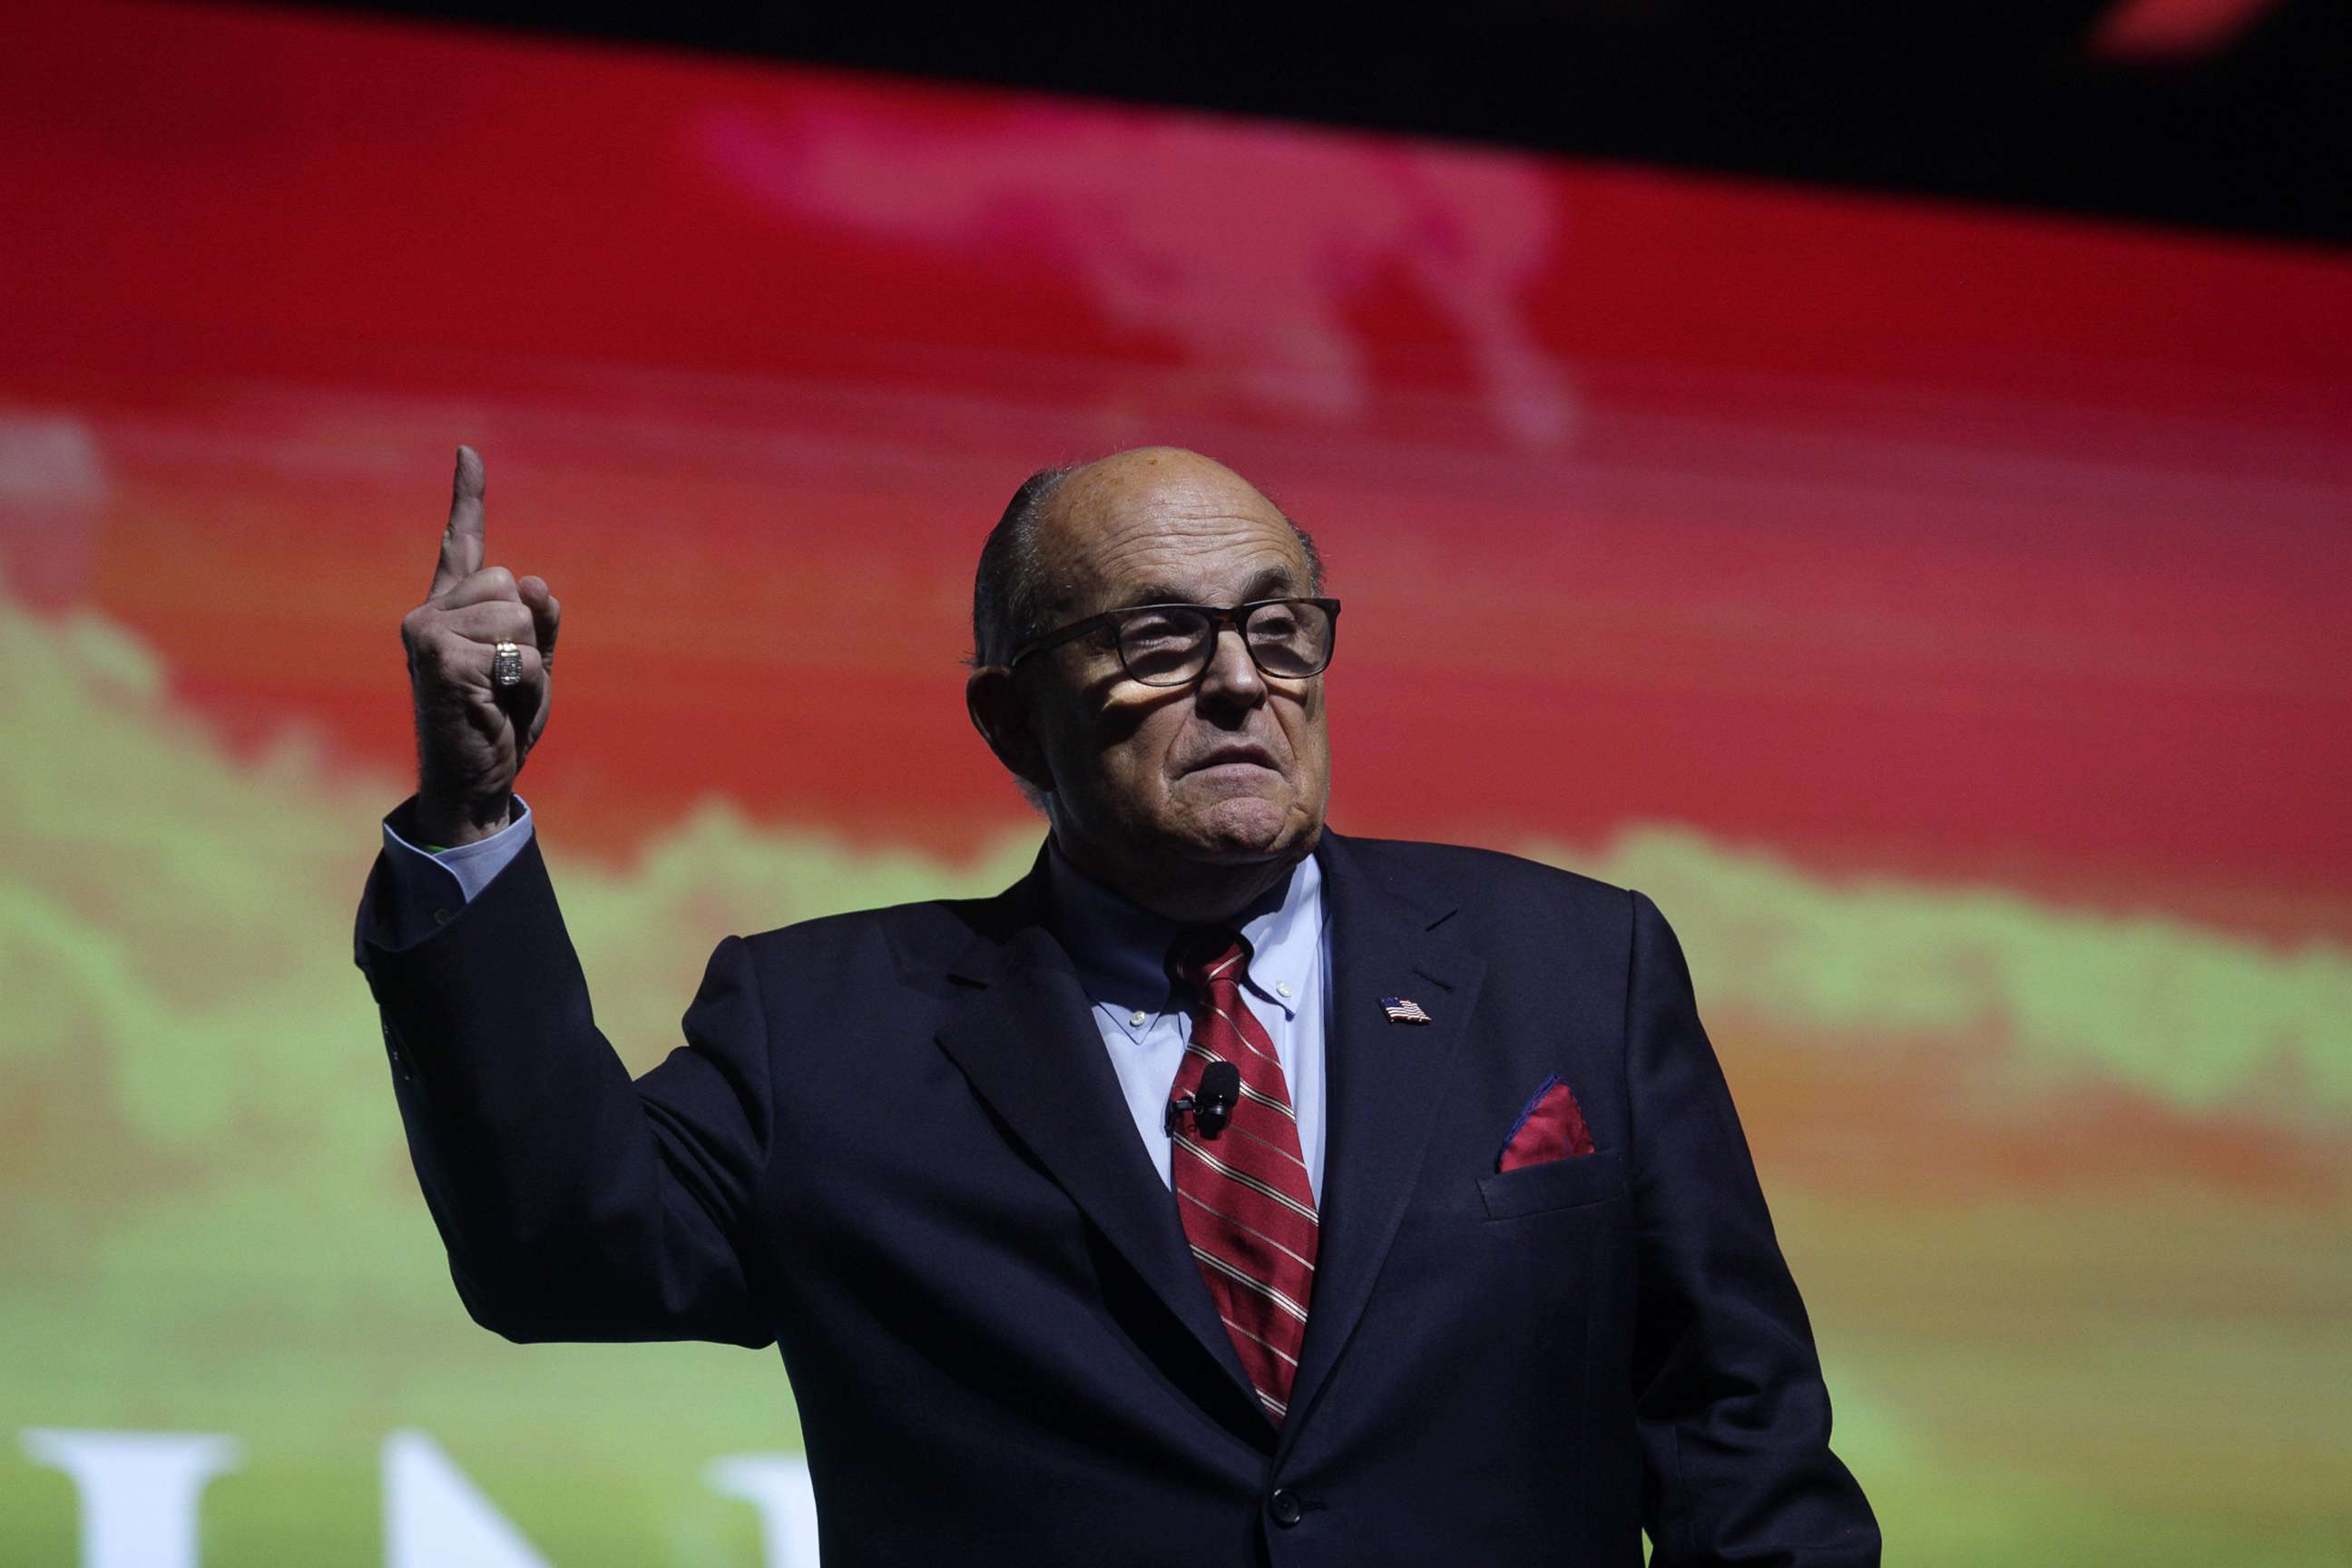 PHOTO: Trump Attorney Rudy Giuliani addresses the crowd at the Turning Point USA Student Action Summit on Dec. 19, 2019 in Palm Beach, Fla.